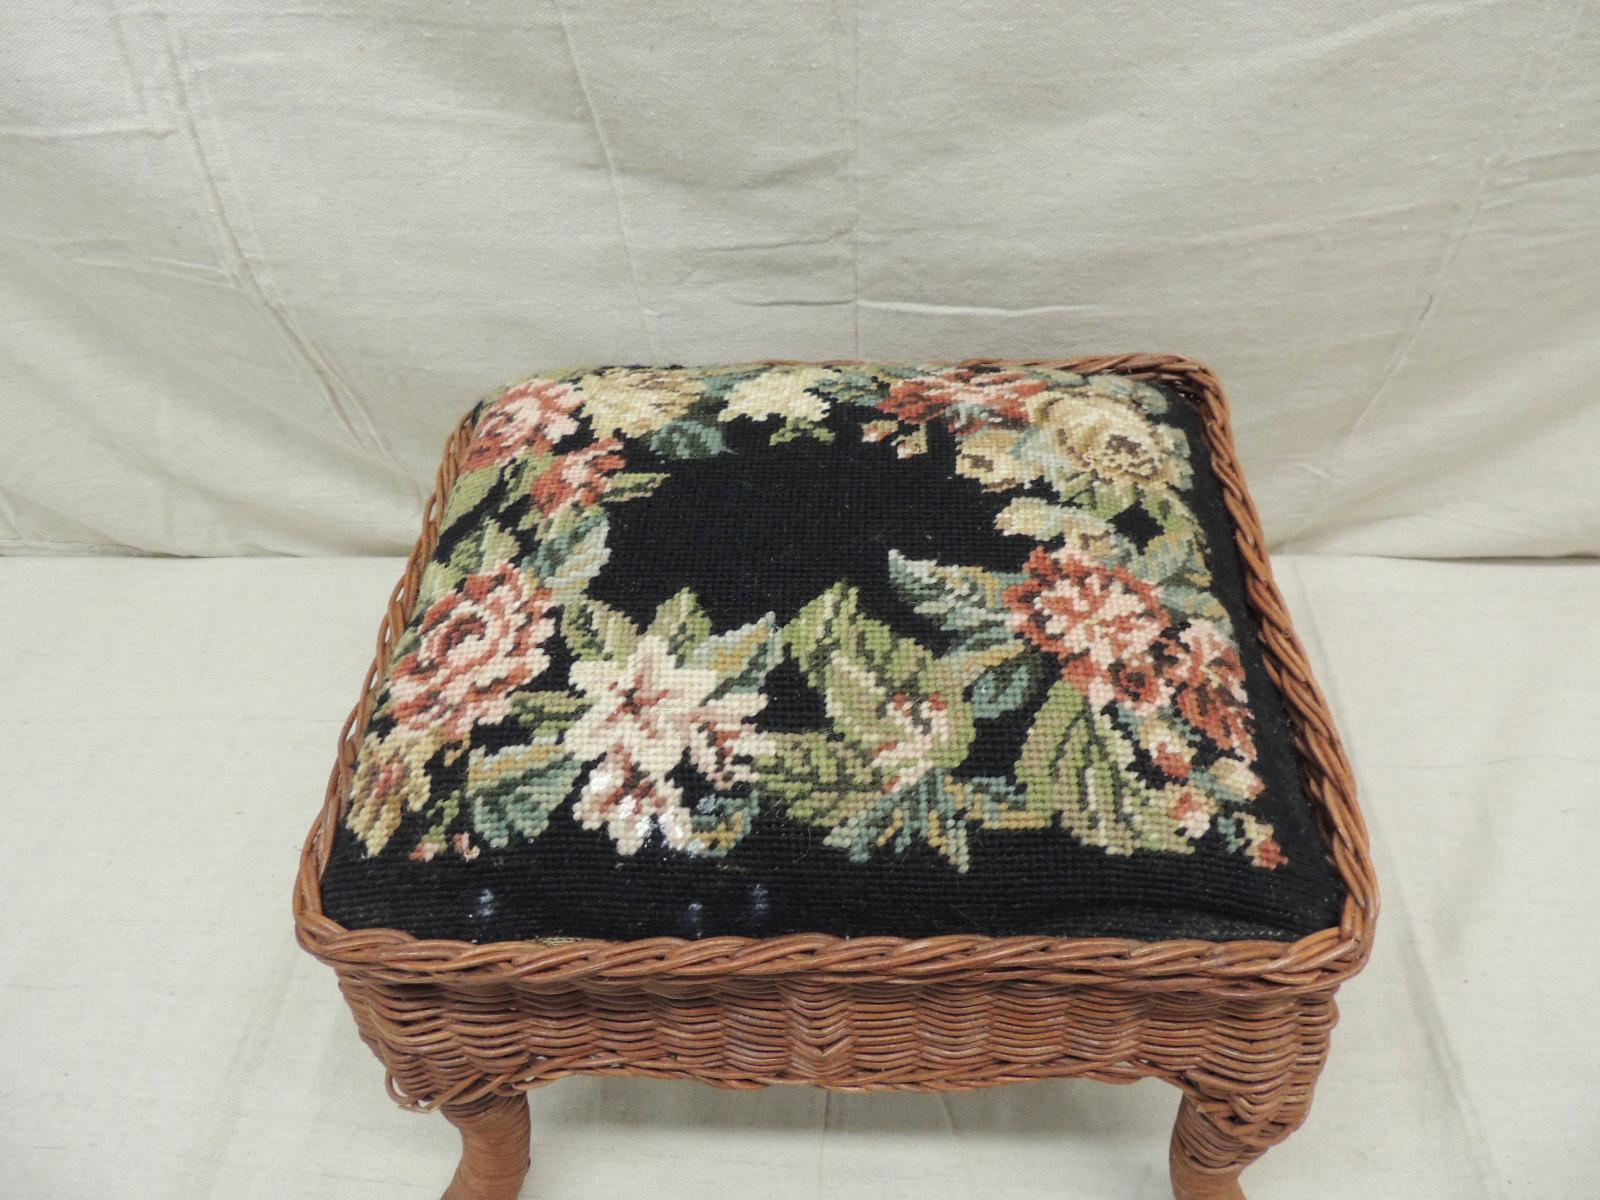 Vintage footstool with antique style needlepoint tapestry
upholstery, rattan frame.
Size: 13